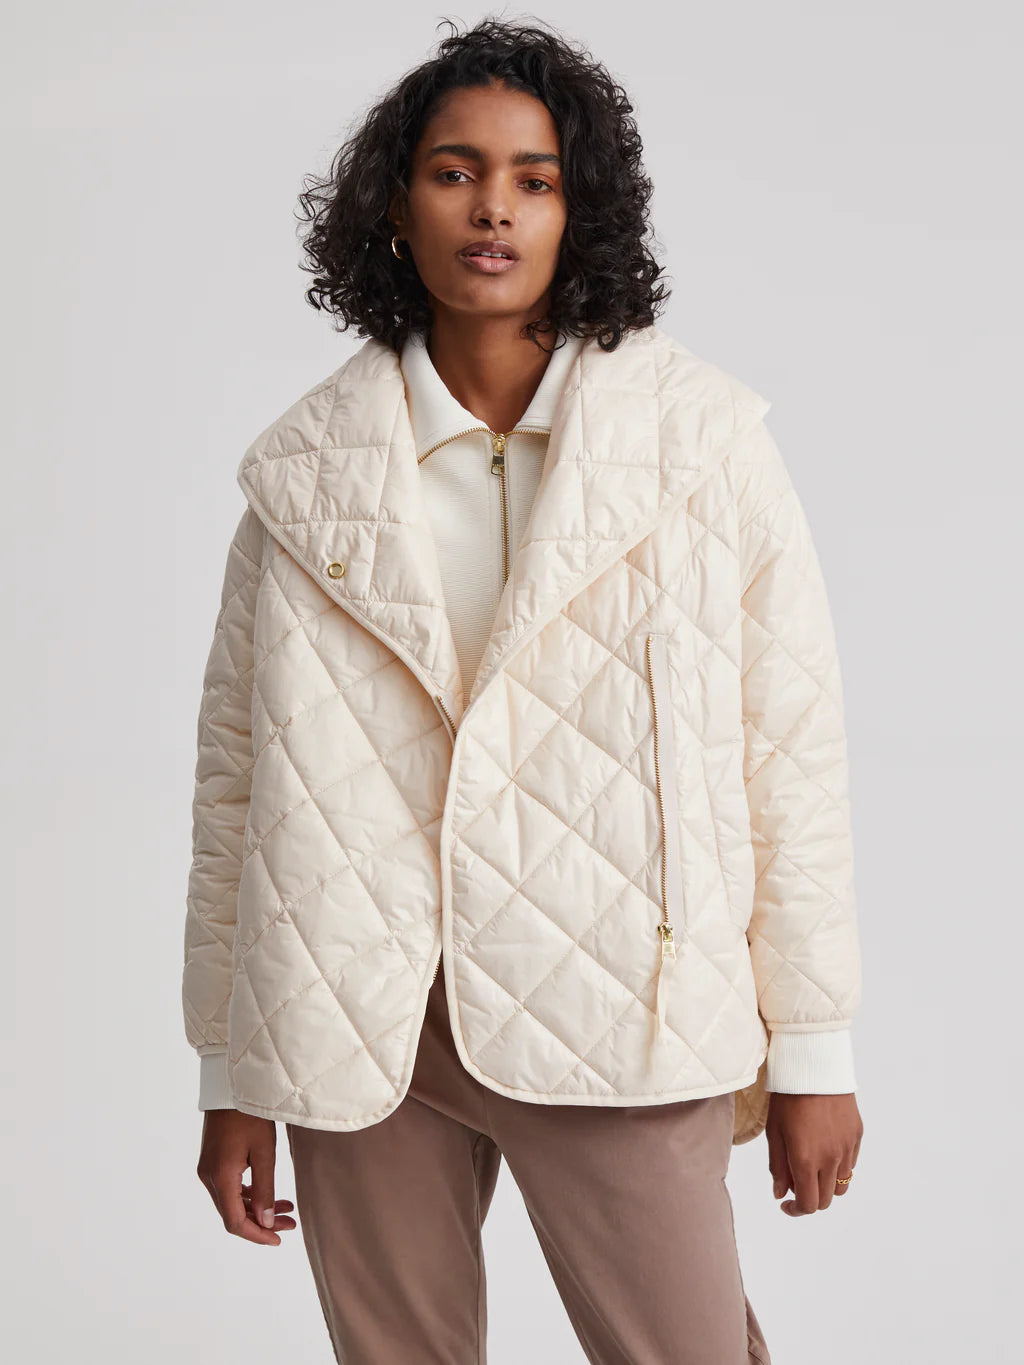 Varley Foster Quilt Jacket | Buy Pilates Clothing Online